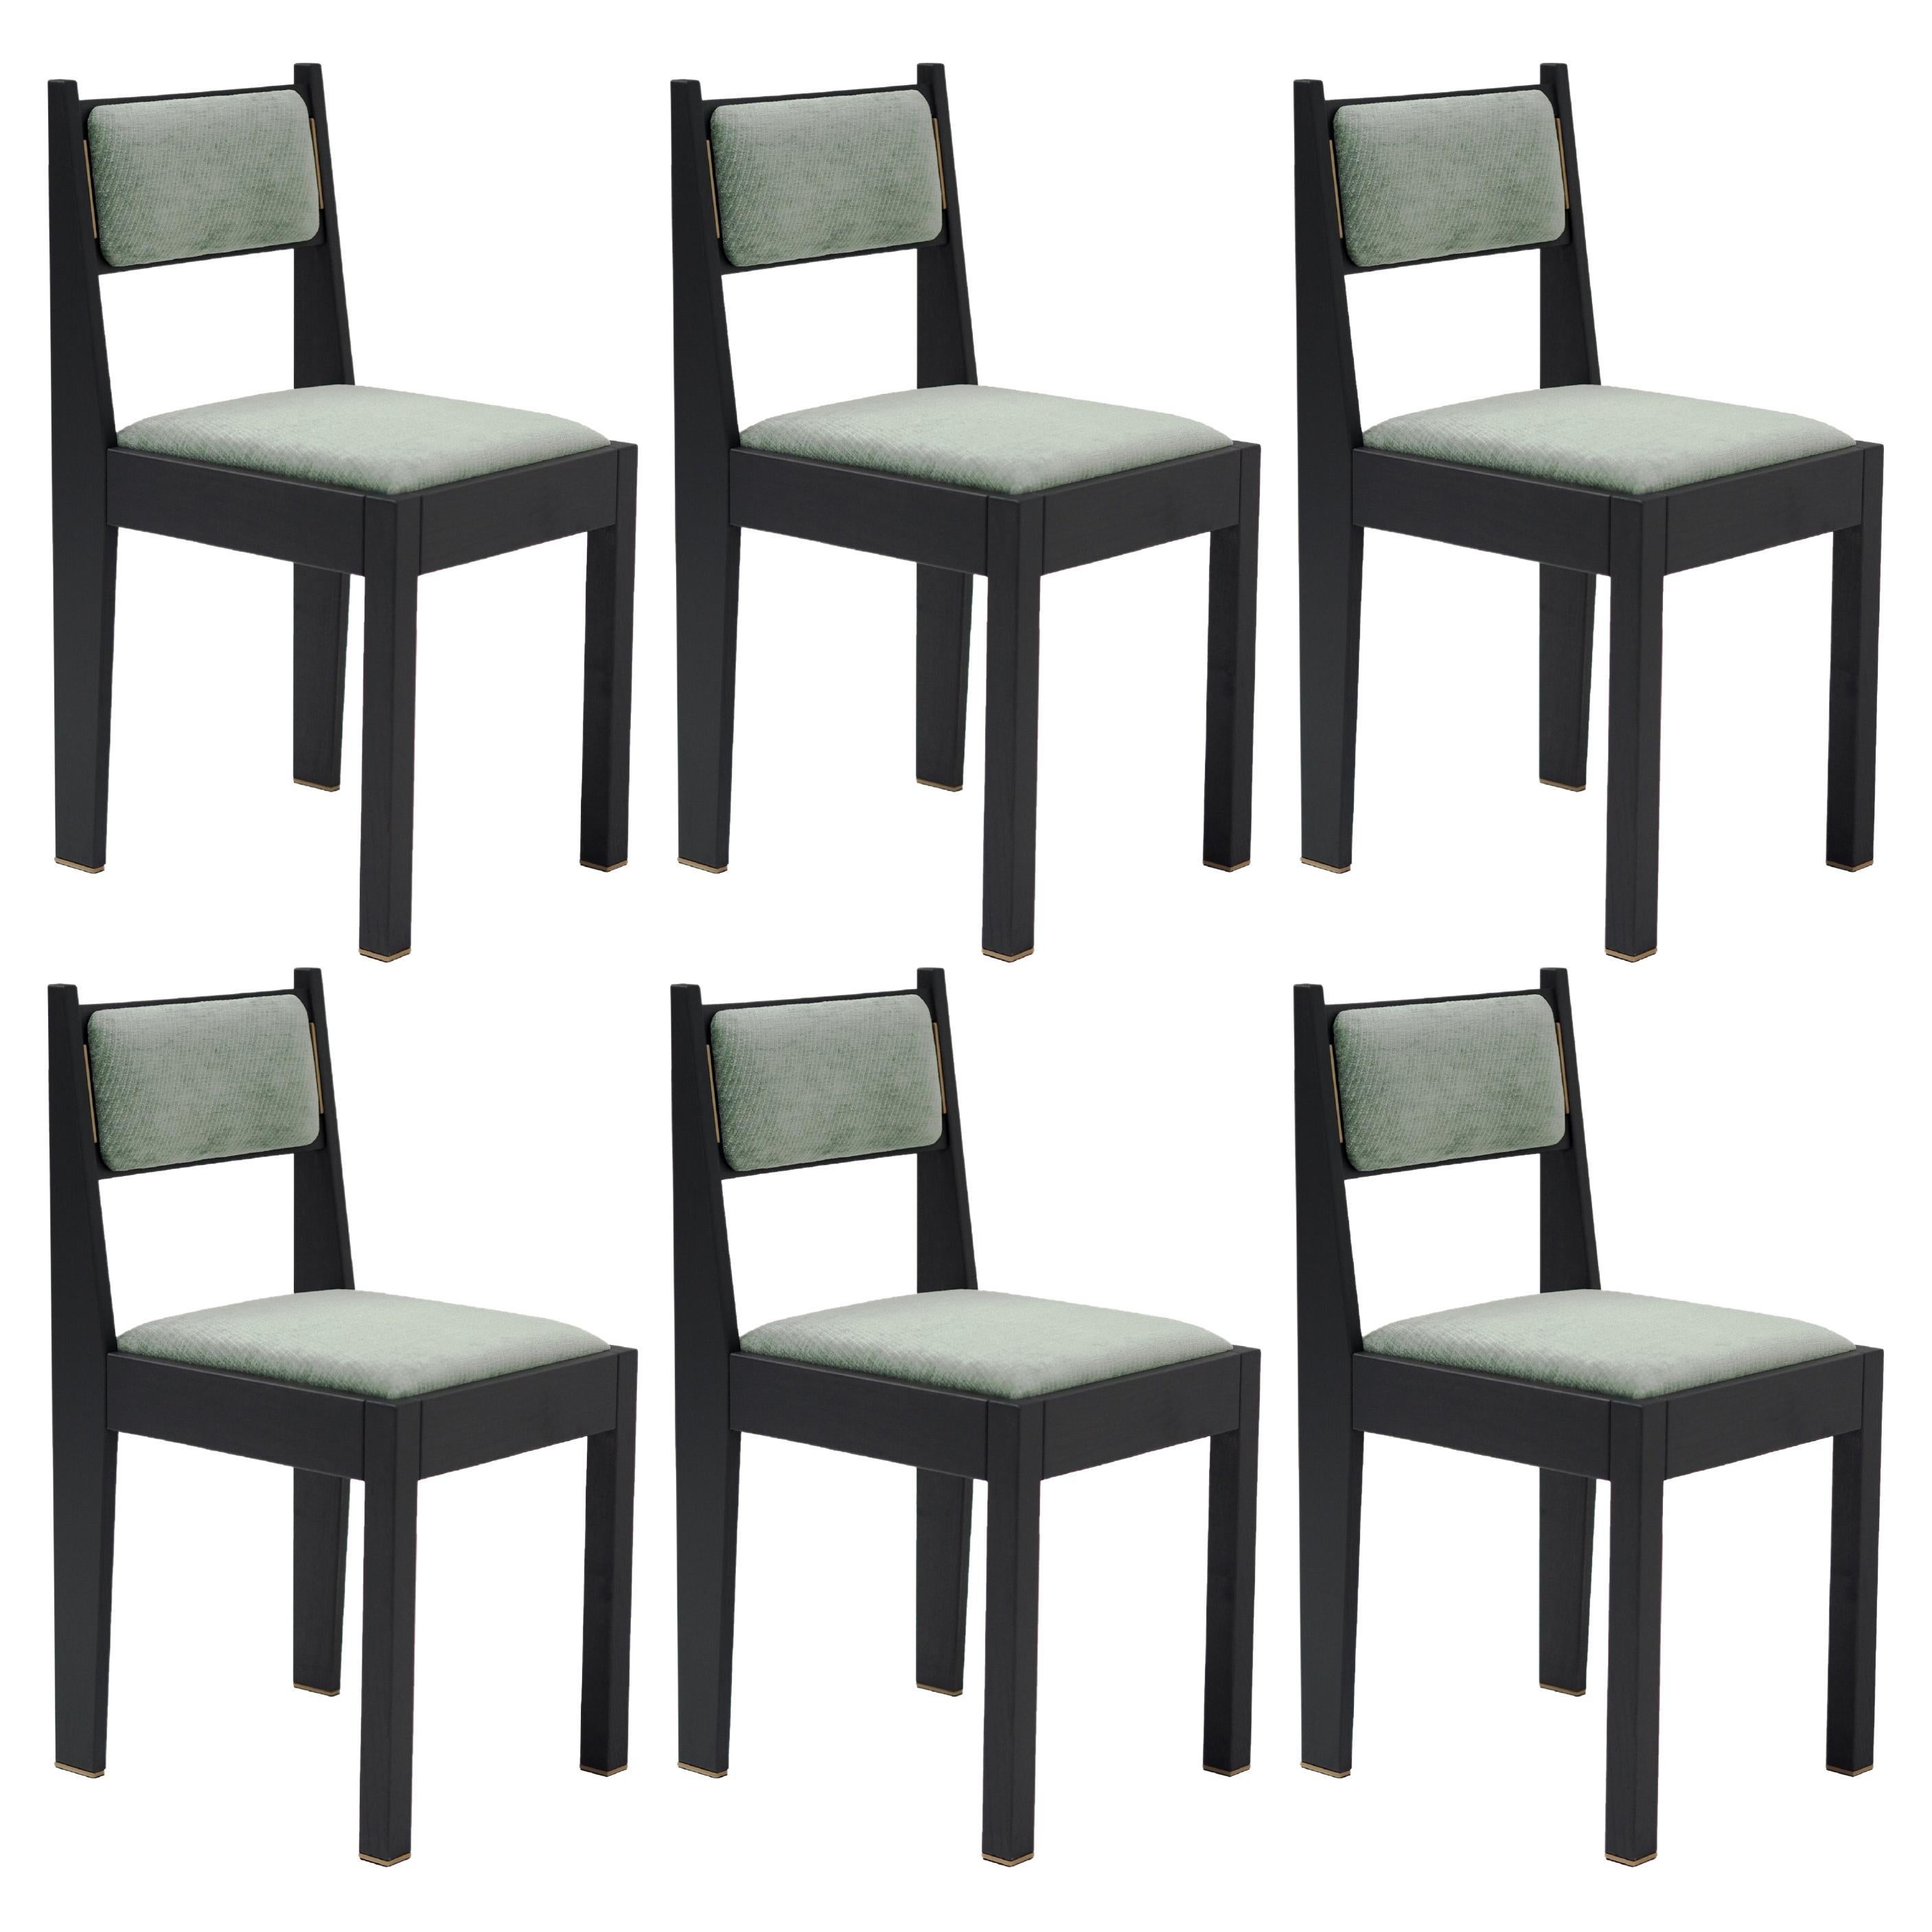 Set of 6 Art Deco Chairs, Black Ash Wood, Green Upholstery & Brass Details For Sale